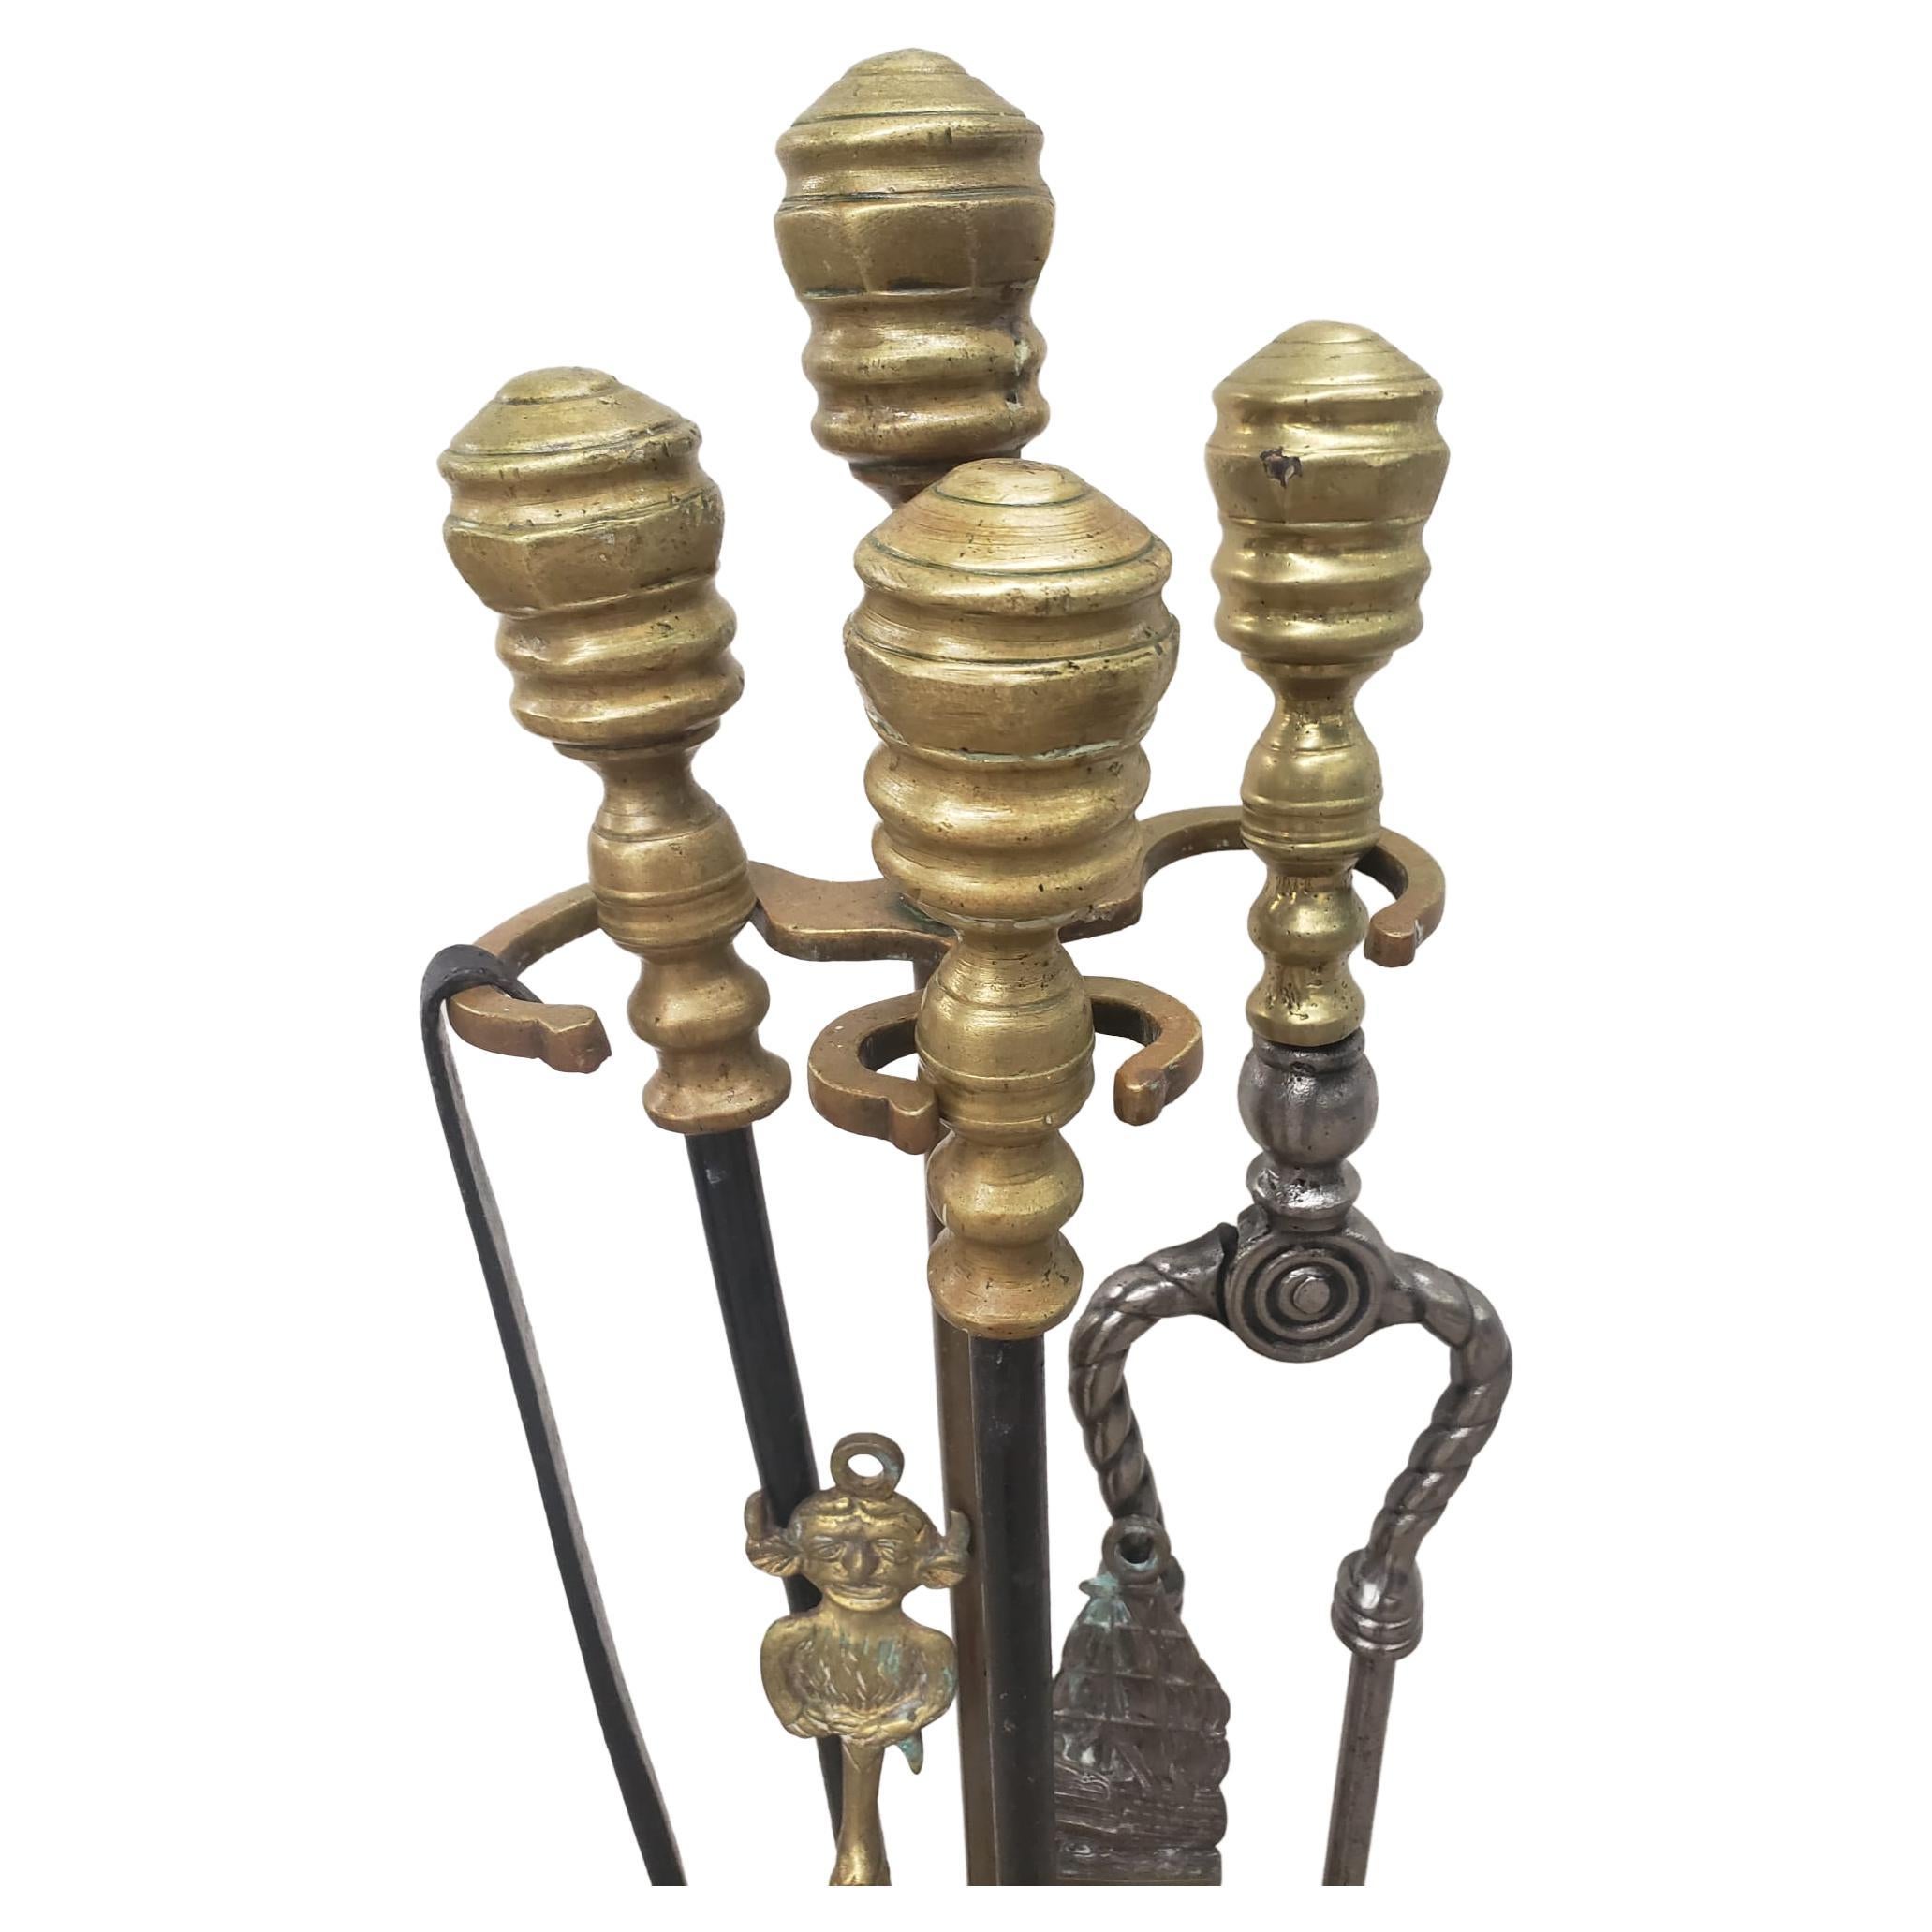 A set William IV brass and steel Fireplace tools on marble stand, Set of 7, Circa. 1830s
Set consist of a Tong, a poker, a shovel, two brass toasting forks, a cast iron fork and a marble base stand.